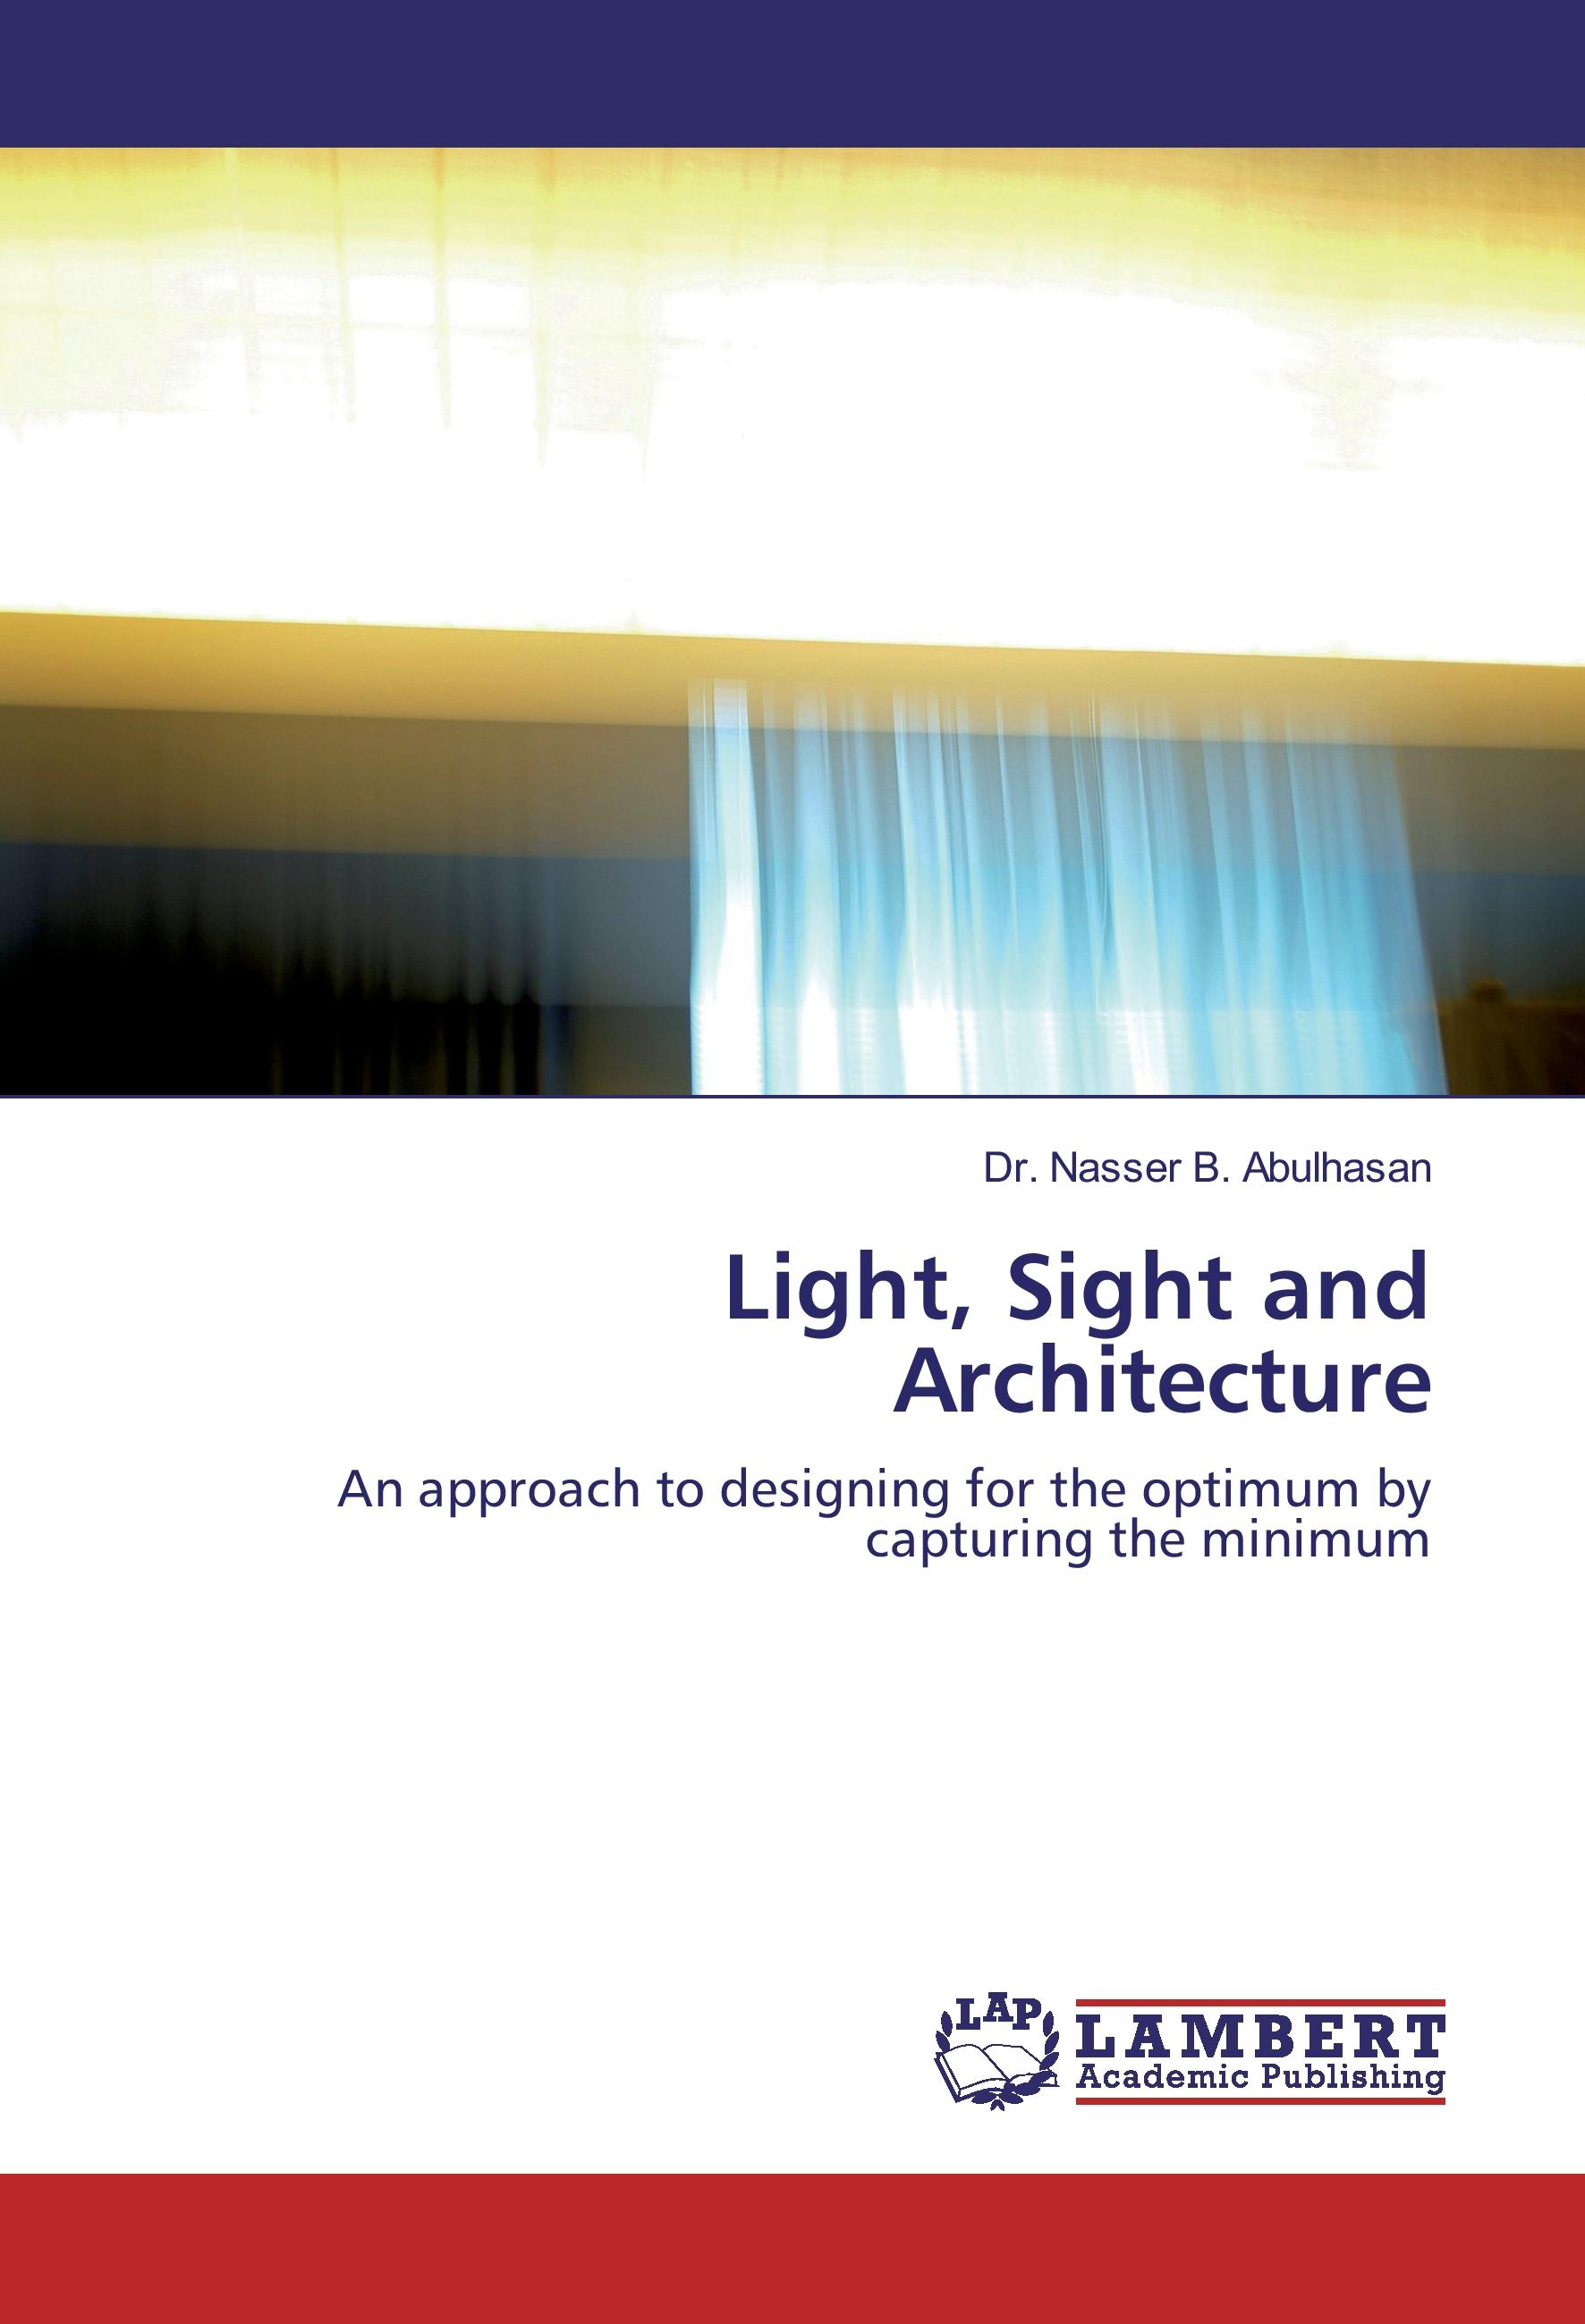 Light, Sight and Architecture - Dr. Nasser B. Abulhasan